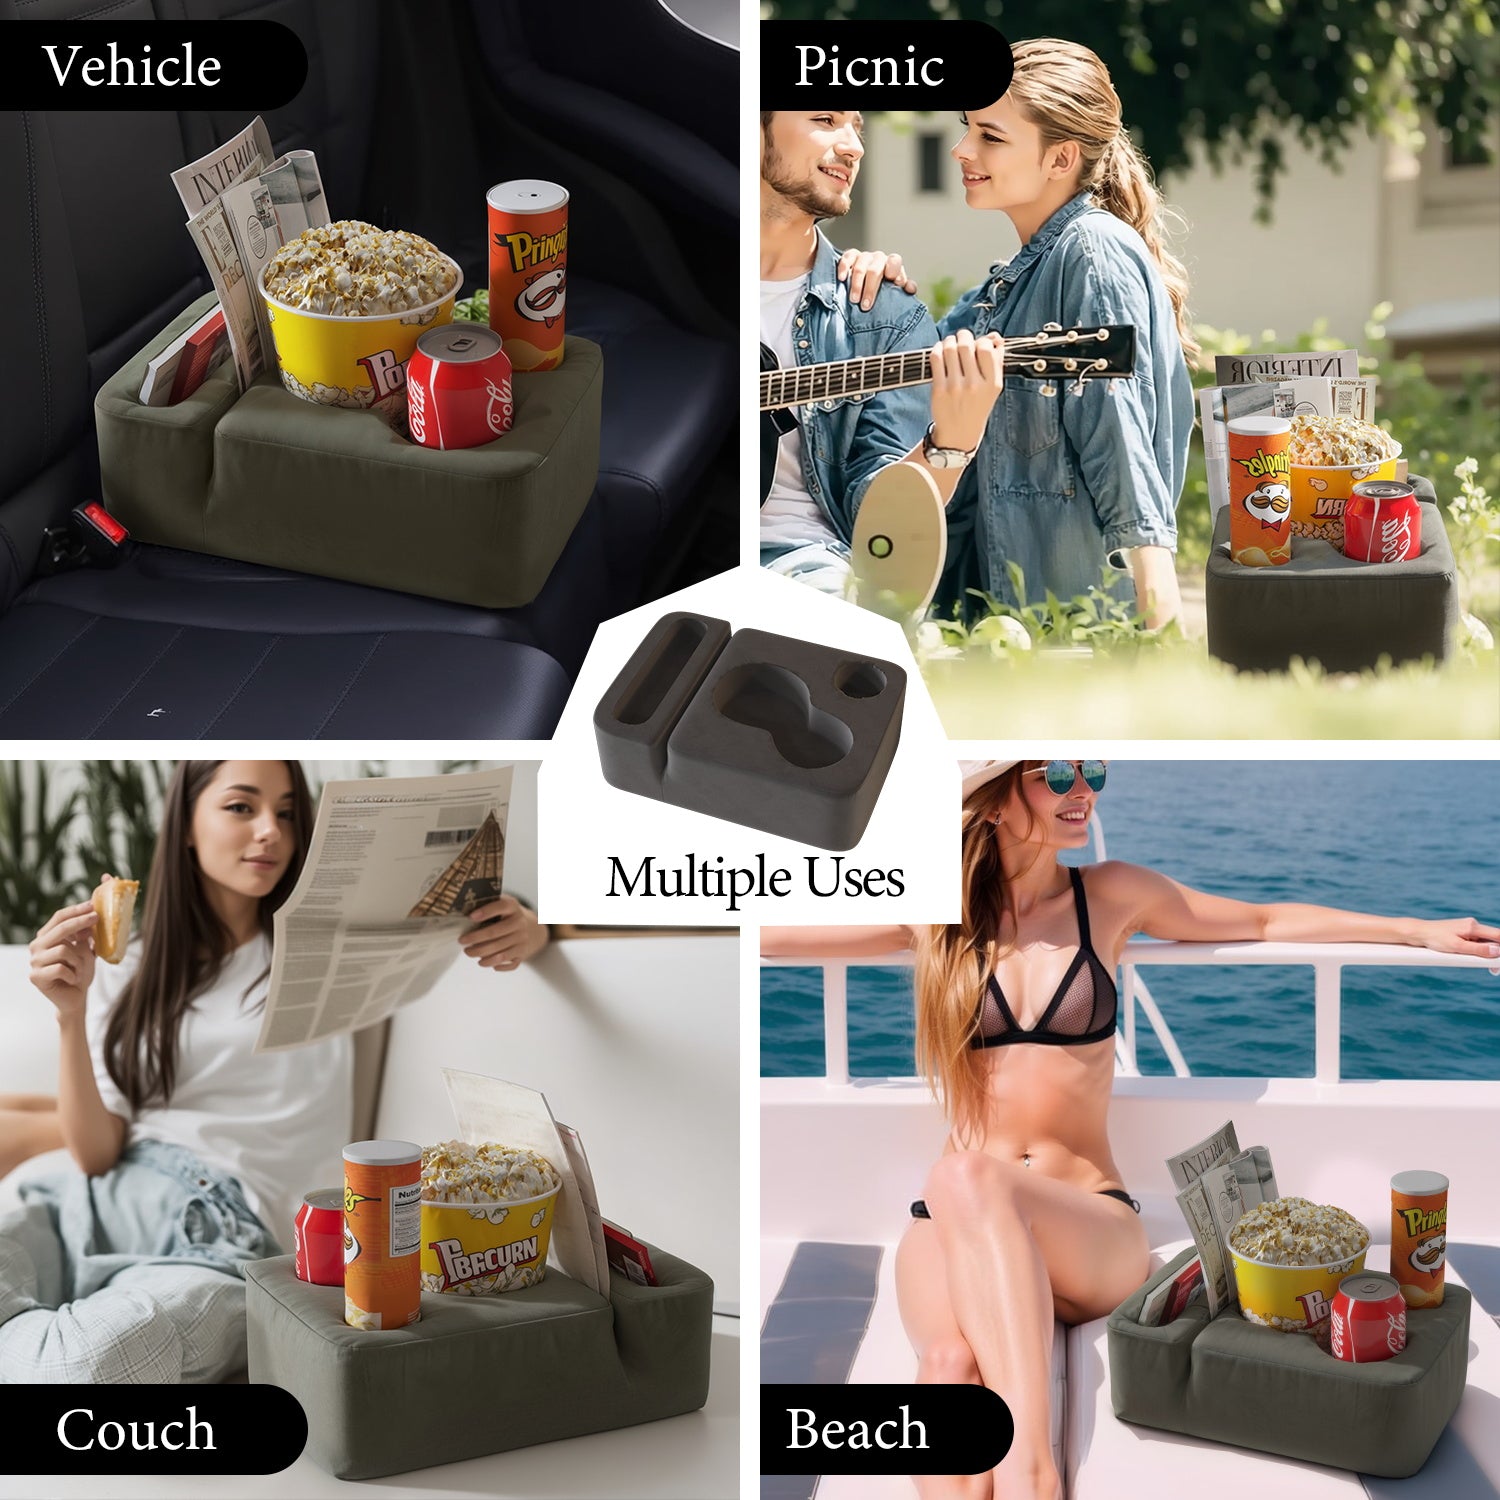 Discover our versatile Couch Cup Holder Pillow. Conveniently sized and made with high-quality materials, it organizes drinks, phones, and more. Lightweight and compact, perfect for cars, desks, beds, and travel. Elevate comfort and organization today!